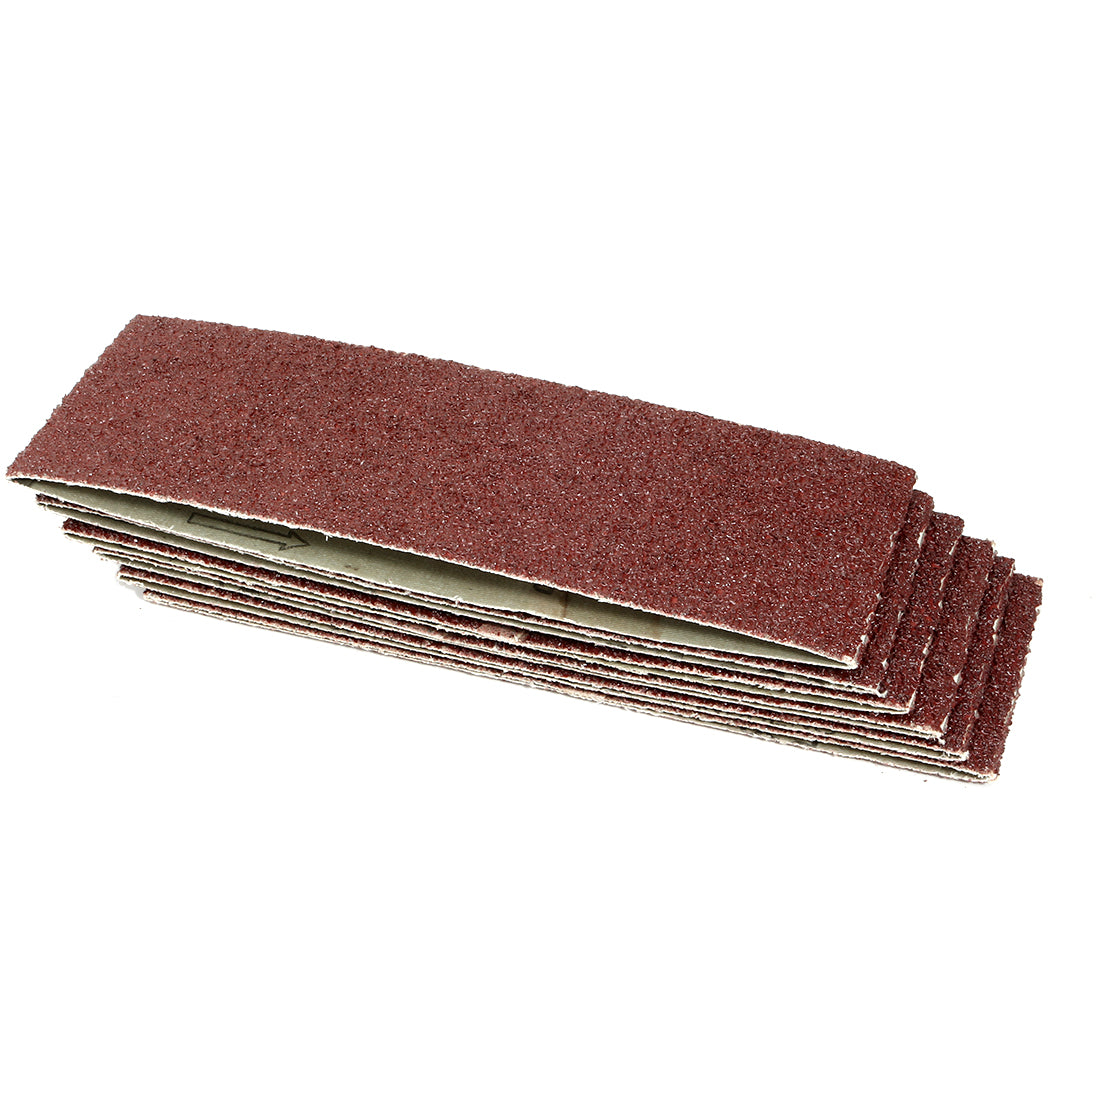 uxcell Uxcell 3-Inch x 18-Inch Aluminum Oxide Sanding Belt 36 Grits Lapped Joint 6pcs